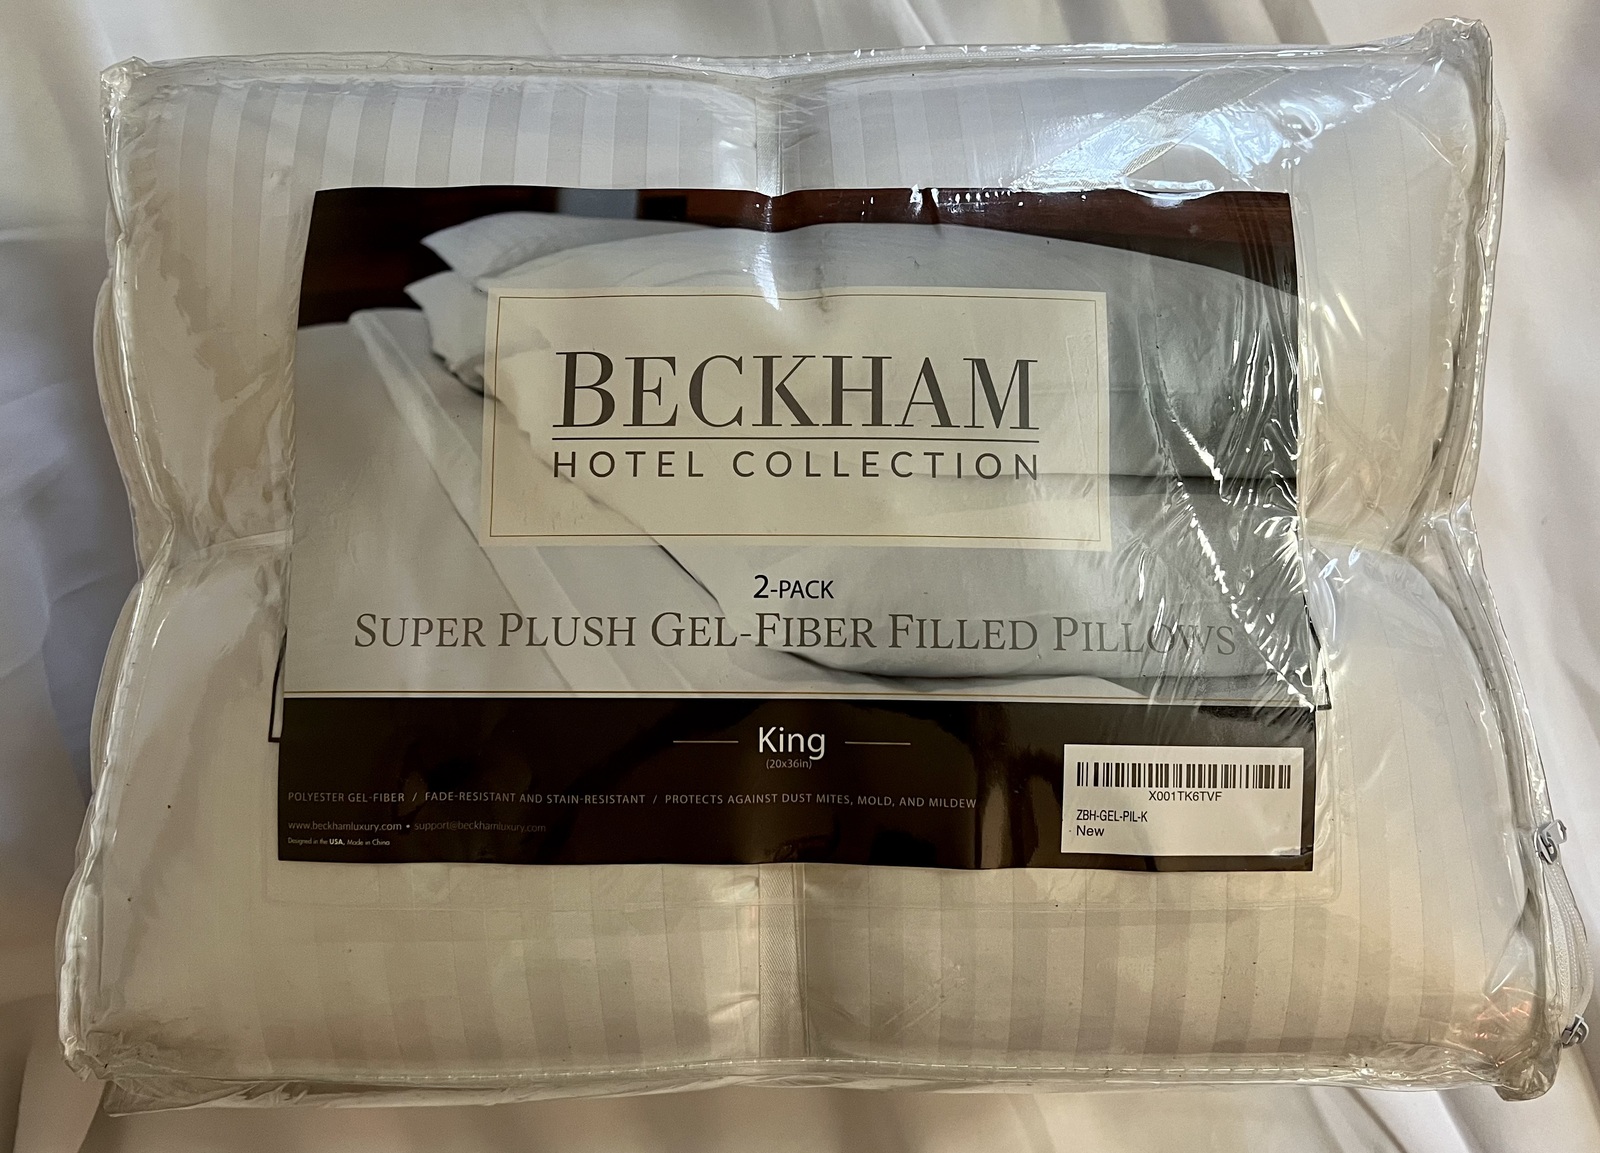 Beckham Hotel Collection Bed Pillows for Sleeping - King Size, Set of 2 - $59.95